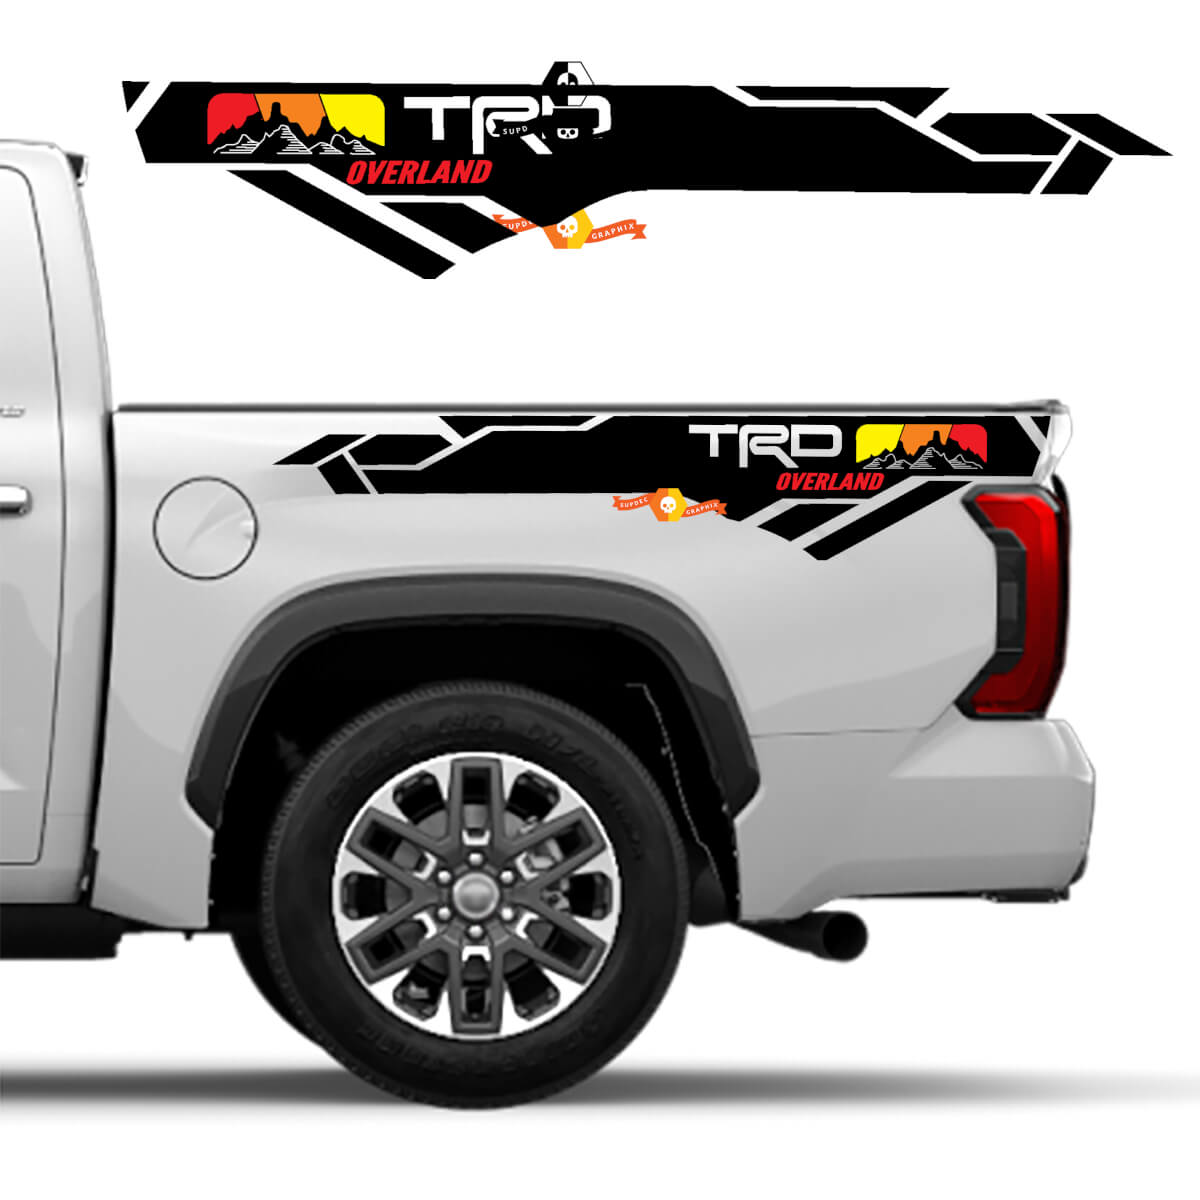 TRD Overland edition Mountain Vintage Colors BedSide Side Vinyl Stickers Decal fit to Toyota Tundra 2022 2023 2024
